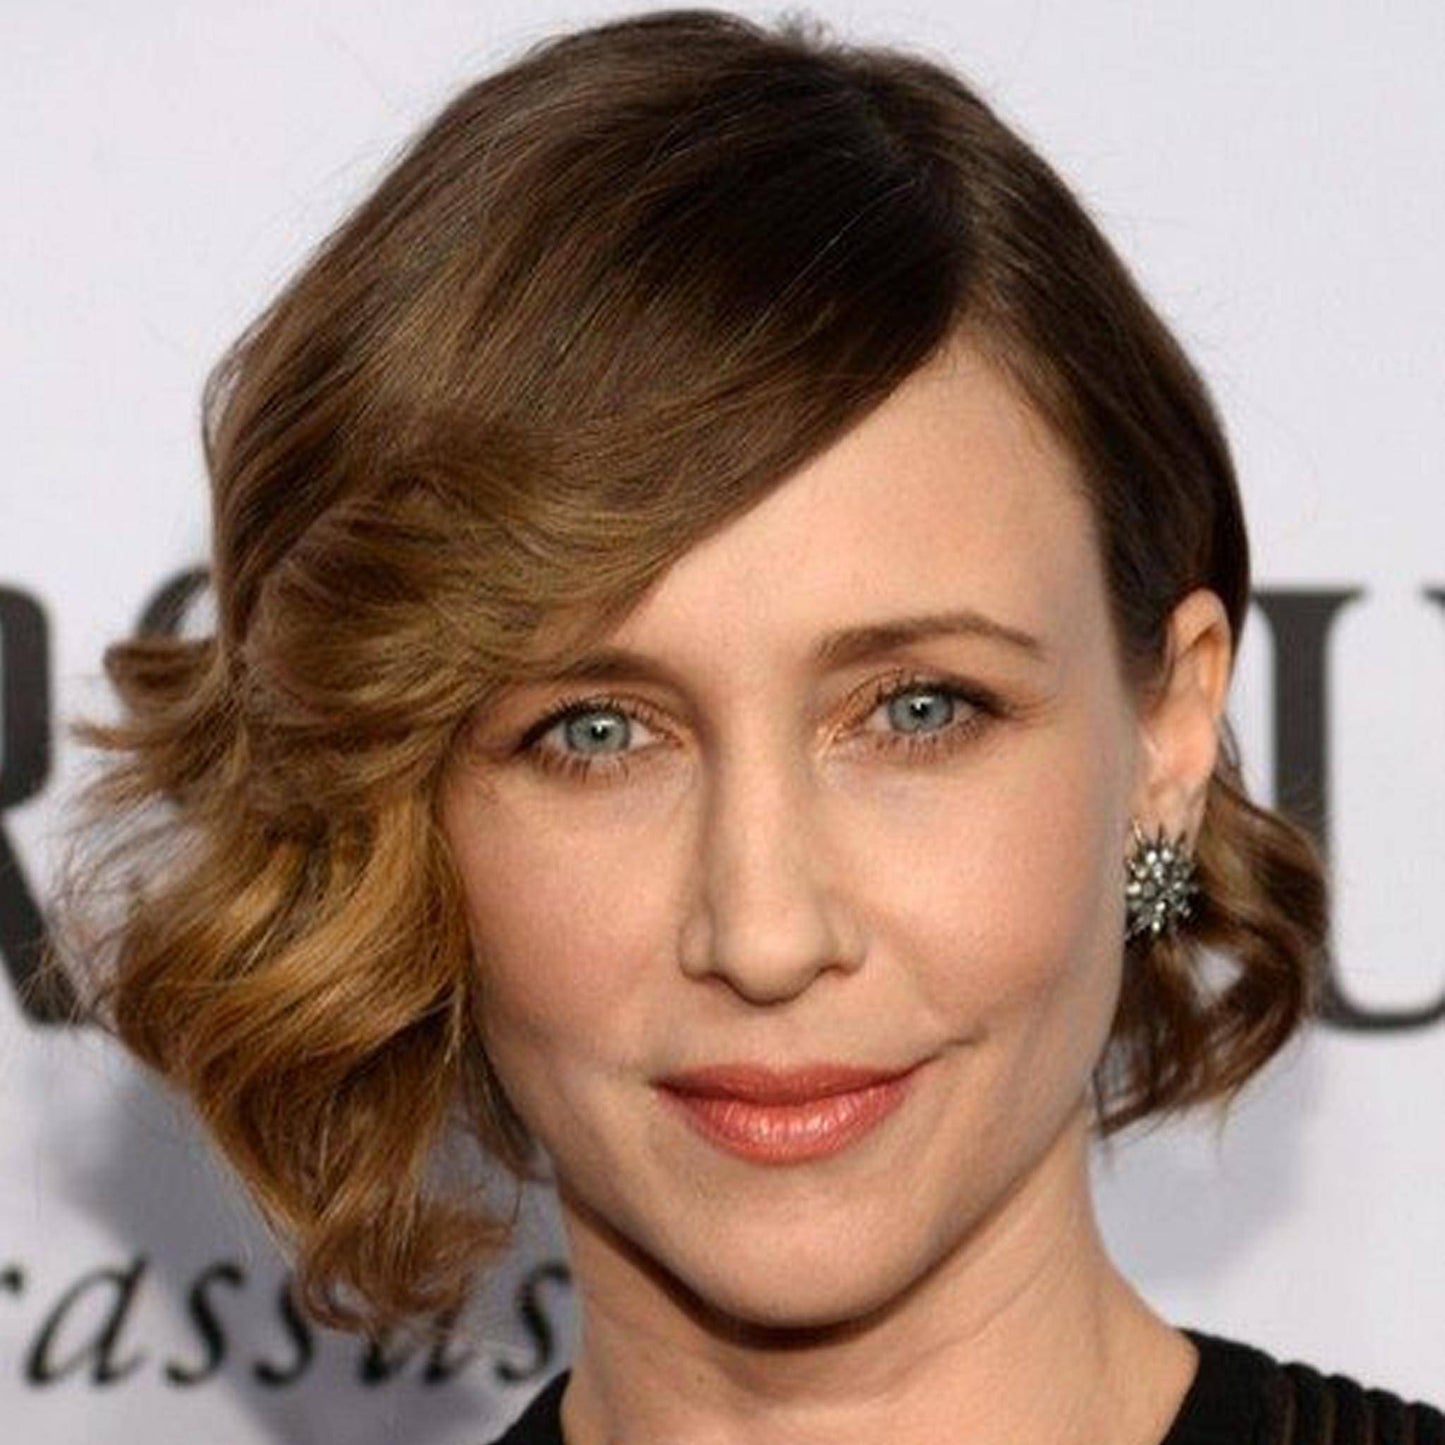 24 Chic Celebrity Short Hairstyles To Try If You're 50 Plus | British Vogue